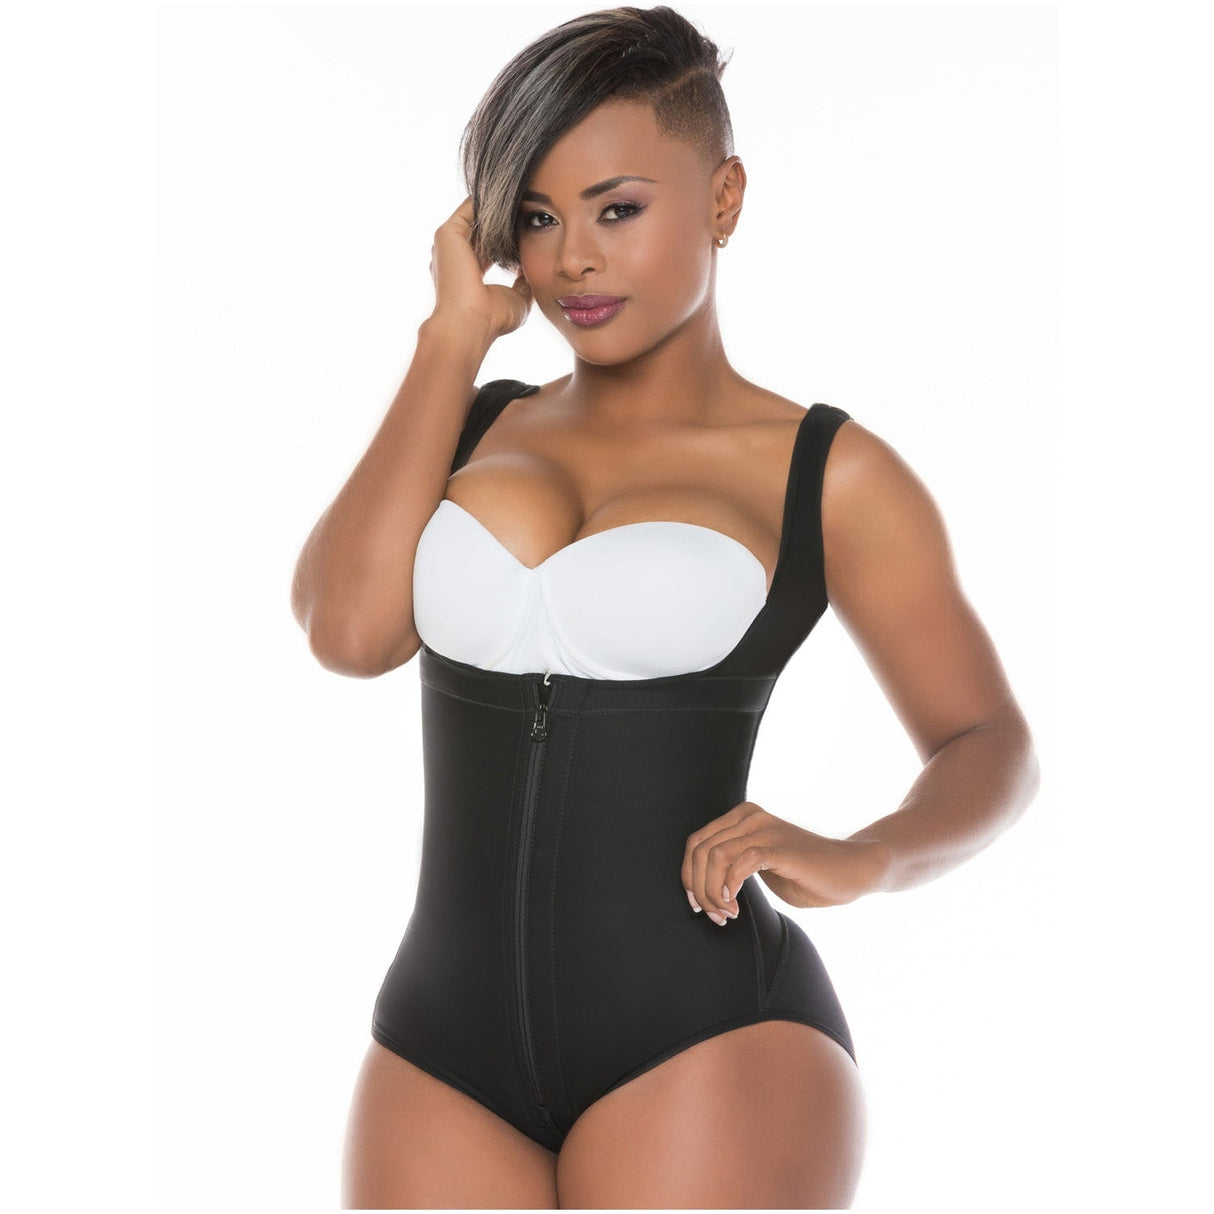 Strapless Colombian Girdles – Fajas Colombianas Sale